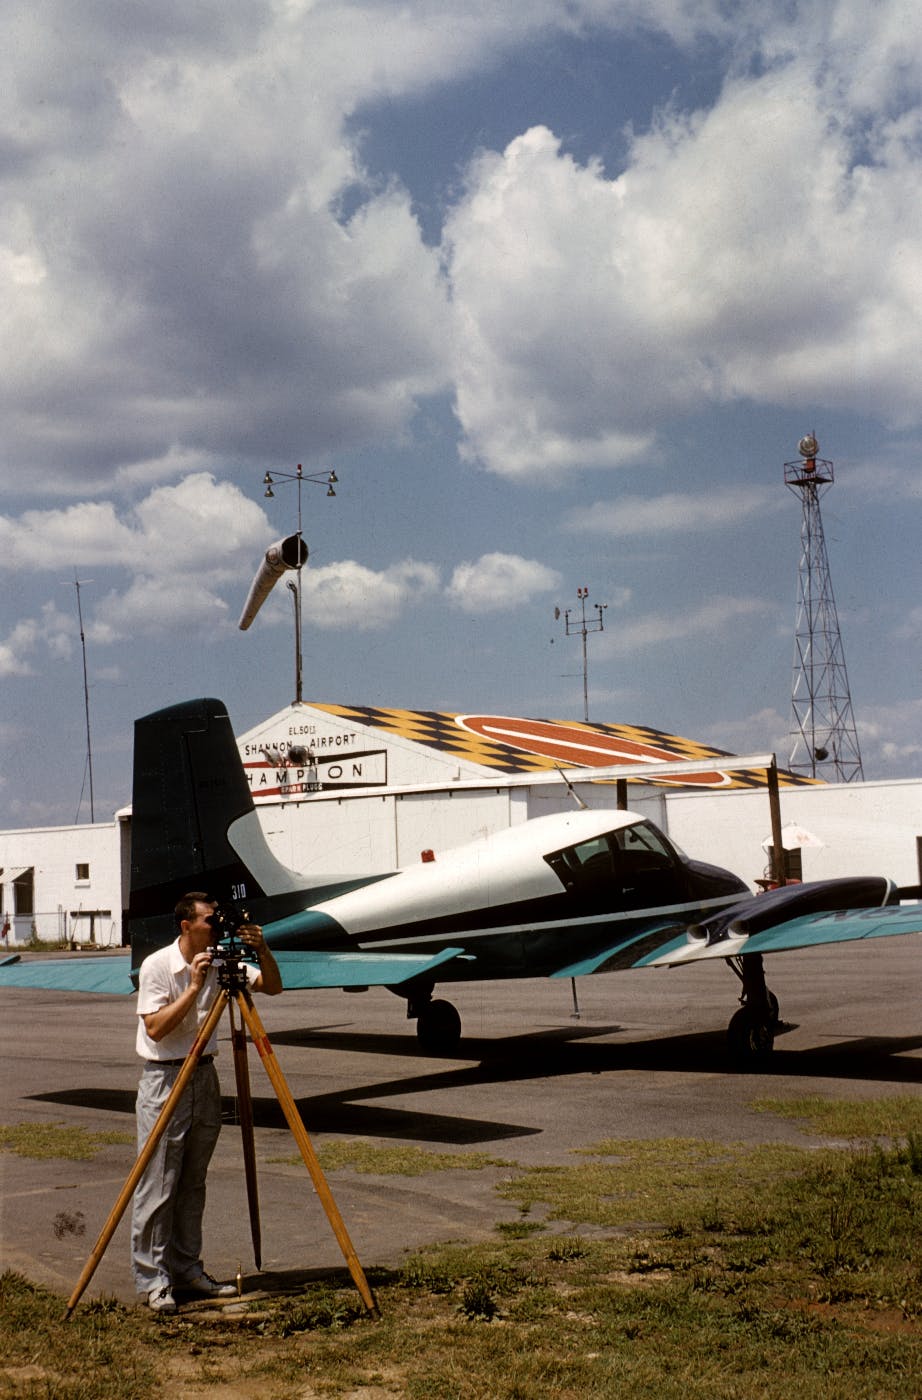 A man looking through a transit, standing in front of a white and blue plane